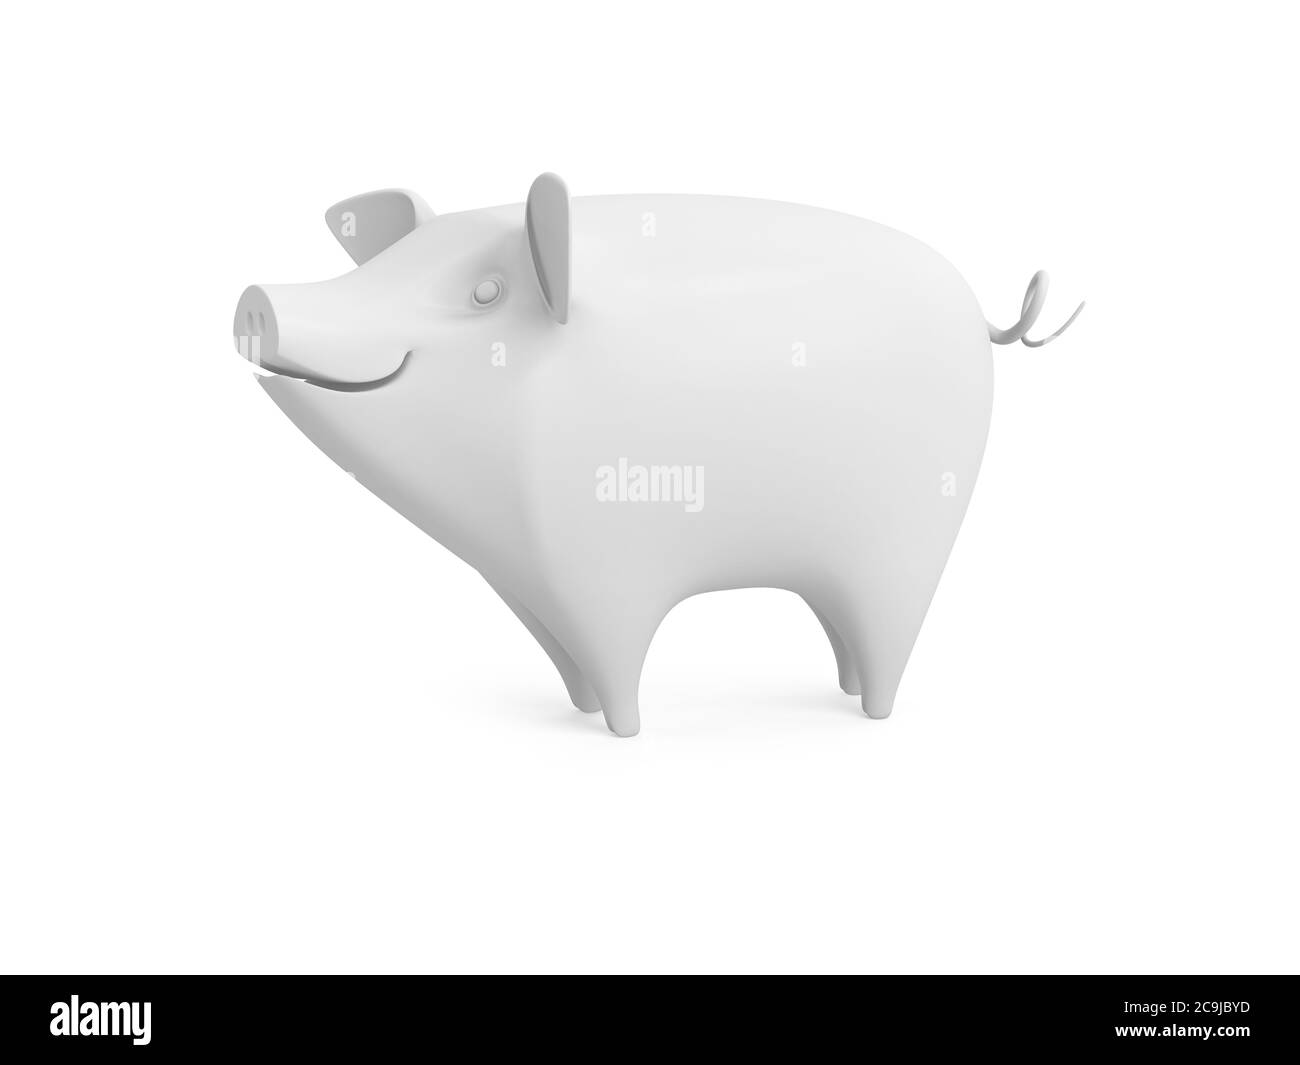 Stylized model of a pig, isolated on white background. 3D illustration, side view. Stock Photo